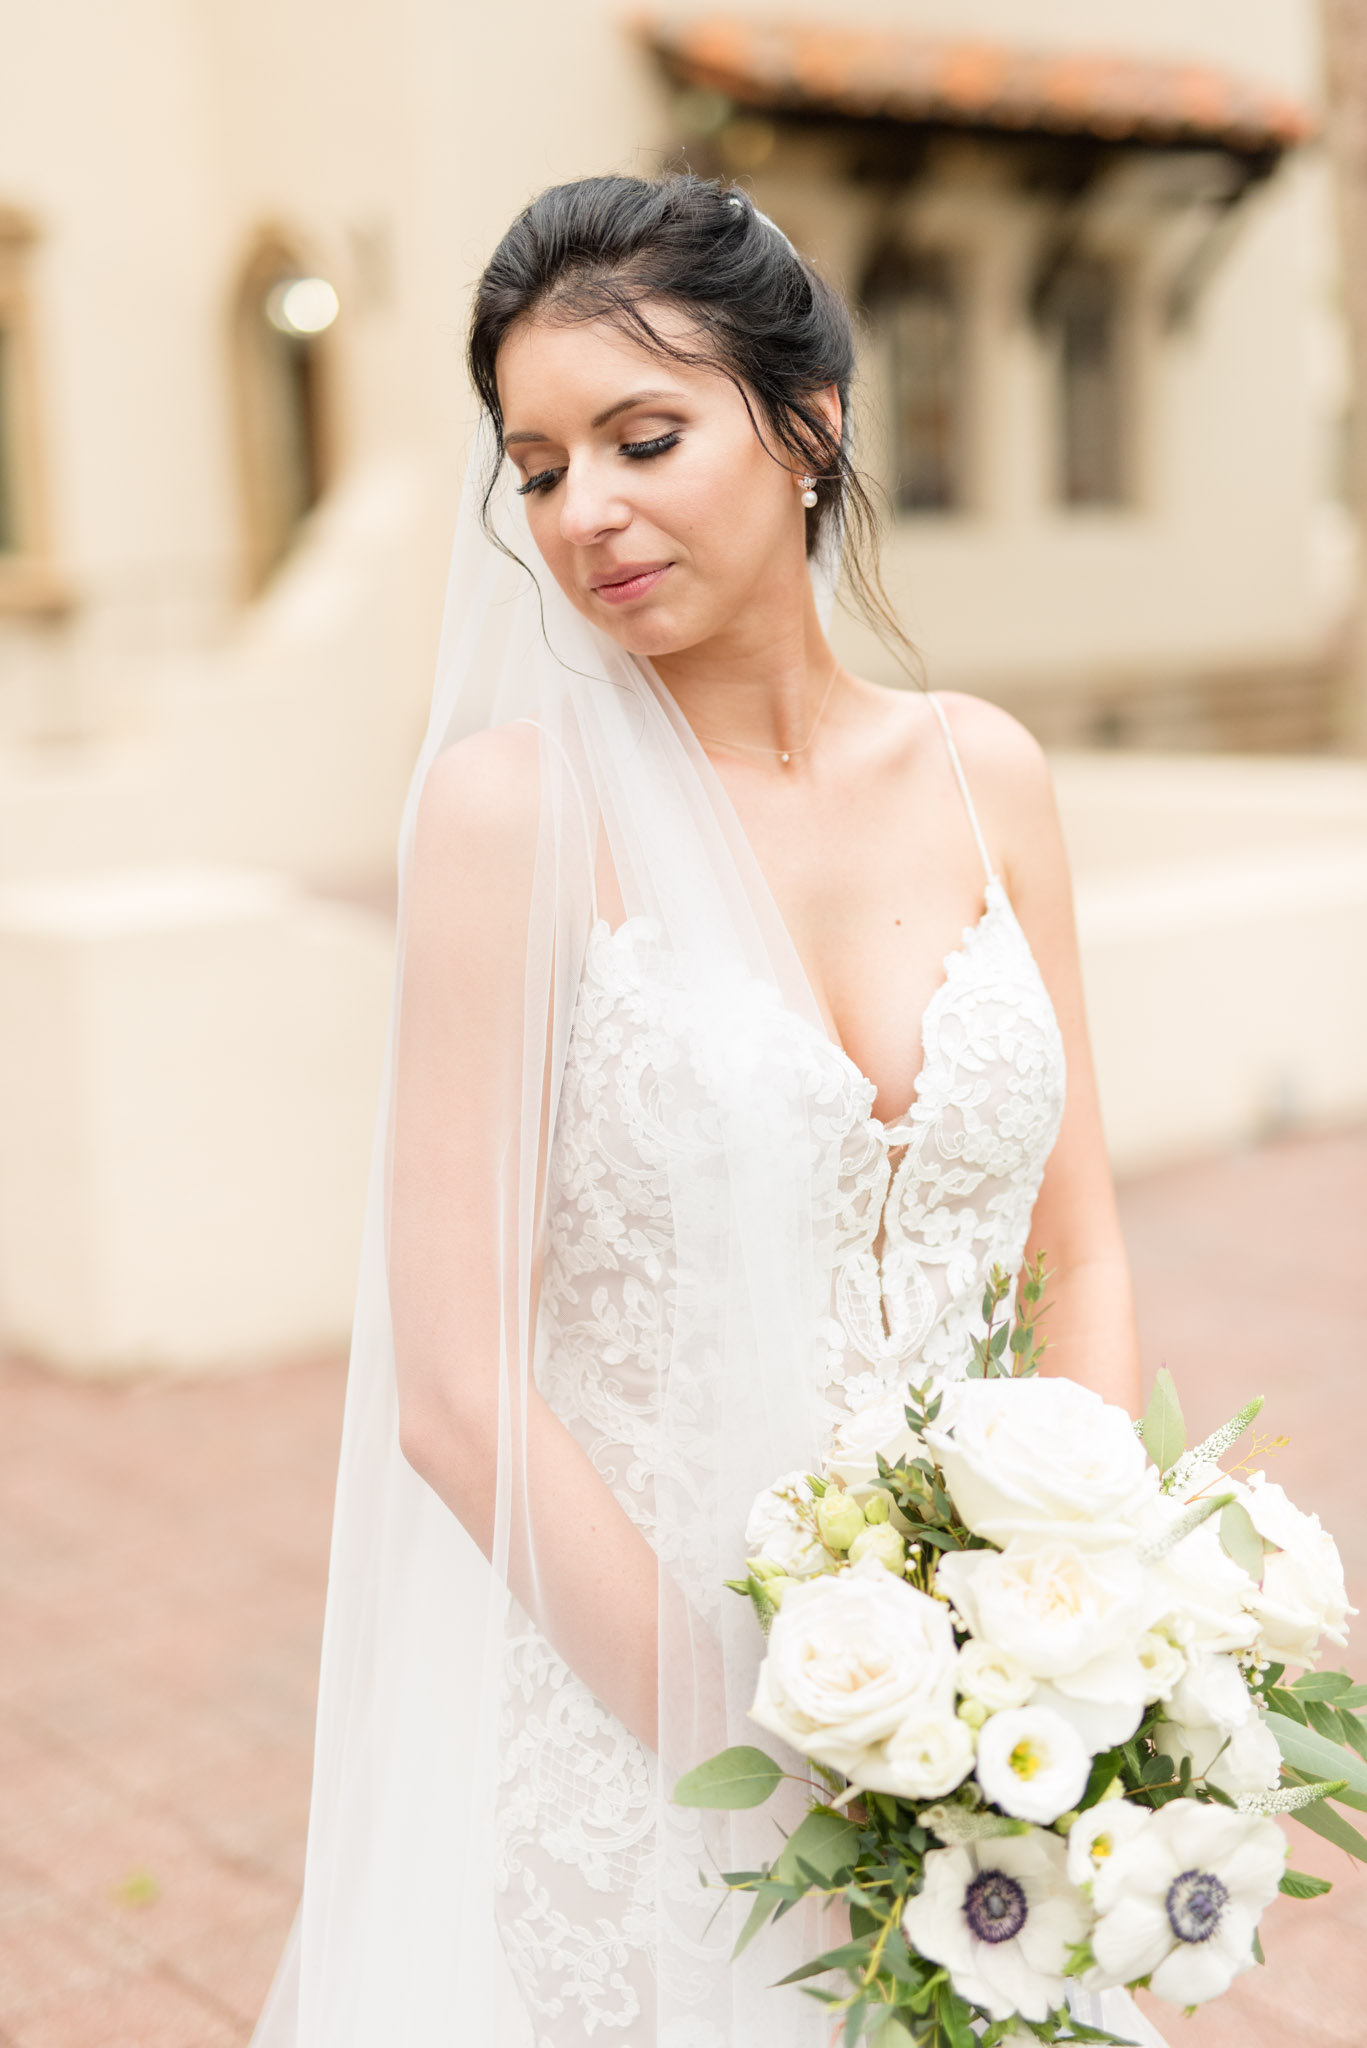 Bride looks over shoulder while holding flowers.